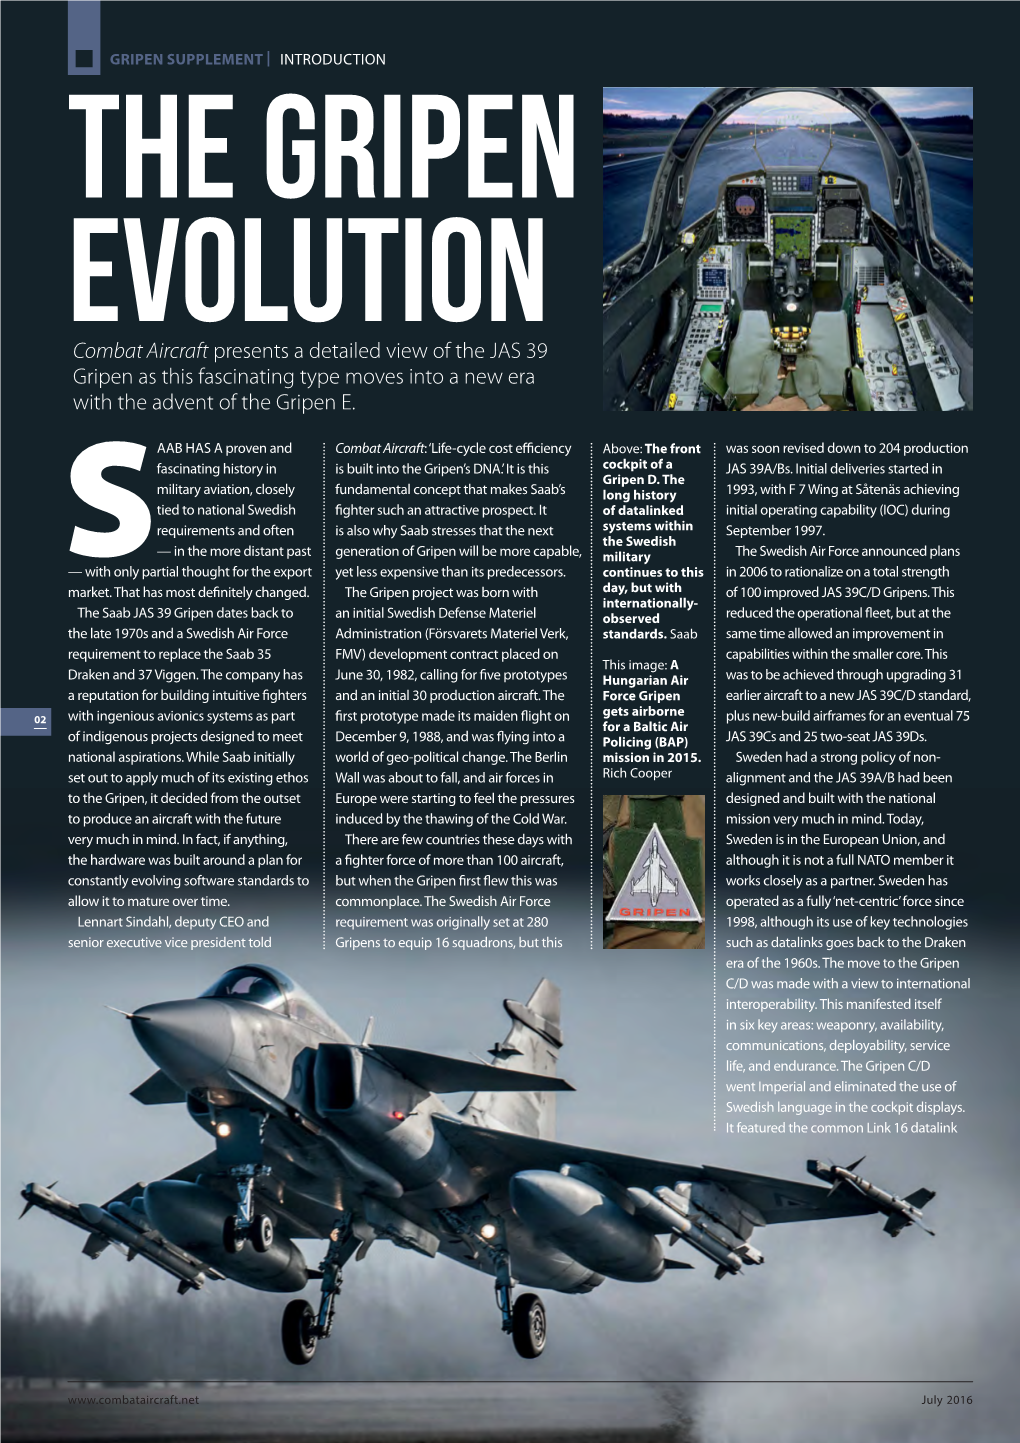 Combat Aircraft Presents a Detailed View of the JAS 39 Gripen As This Fascinating Type Moves Into a New Era with the Advent of the Gripen E